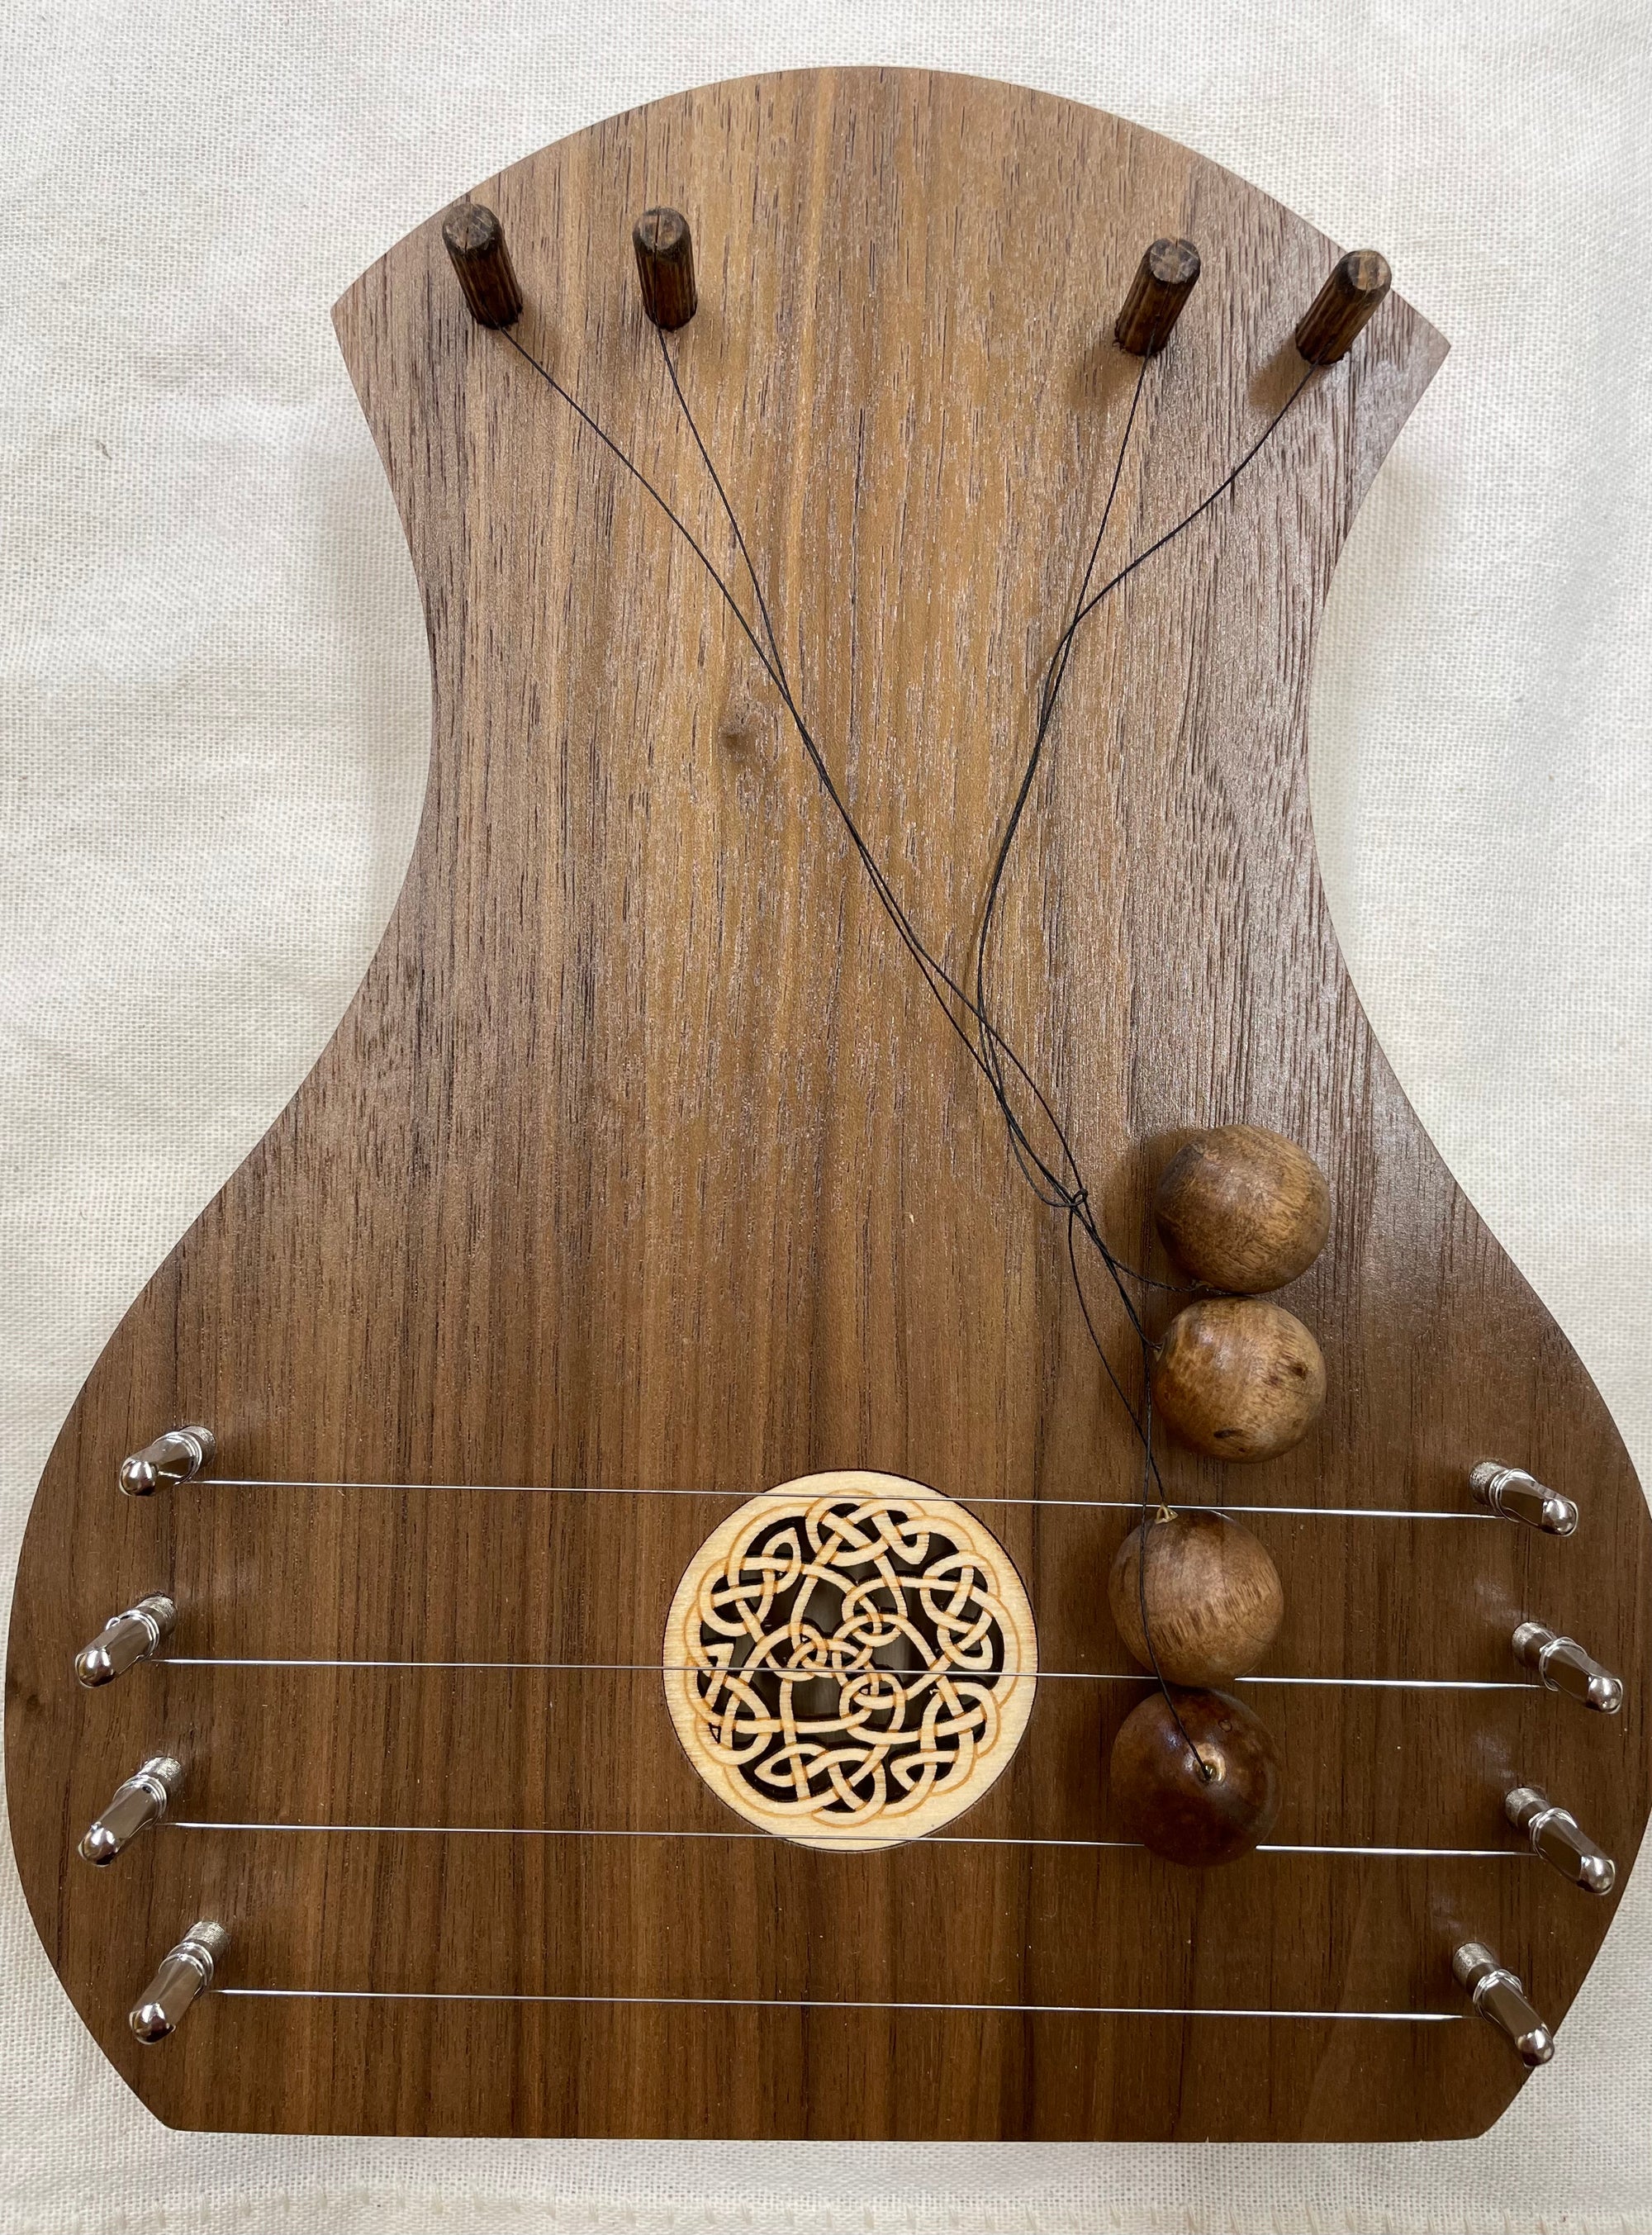 A handcrafted TK O'Brien Door Harp with strings and beads.